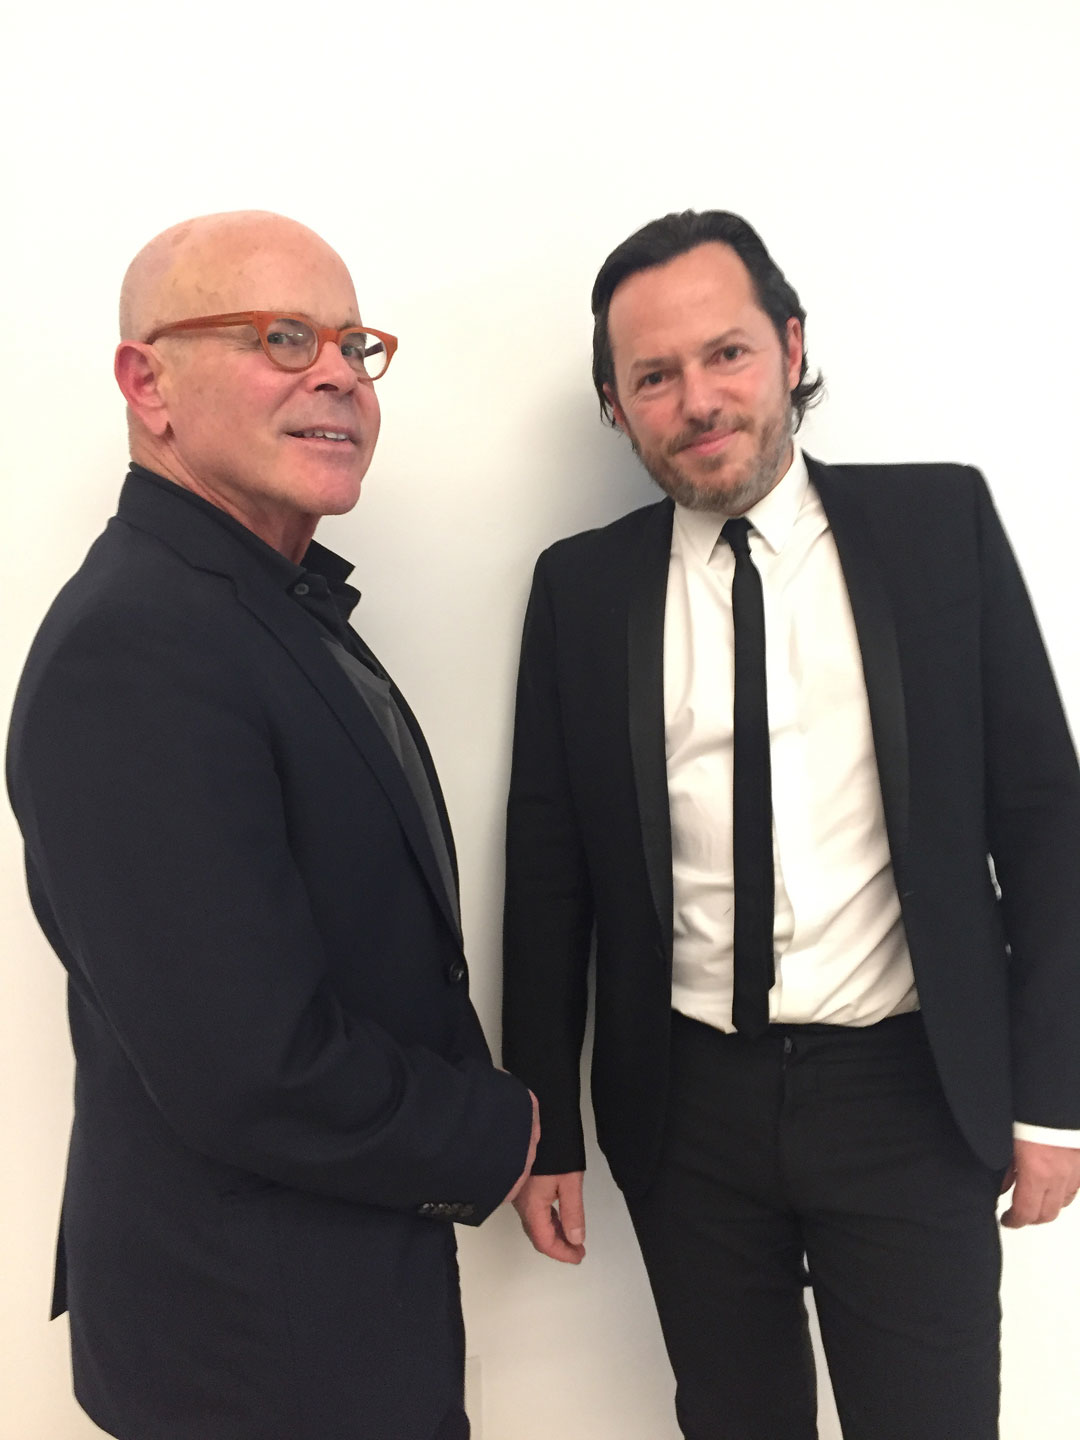 William Norwich and Alexandre de Betak pictured after the talk at Parsons